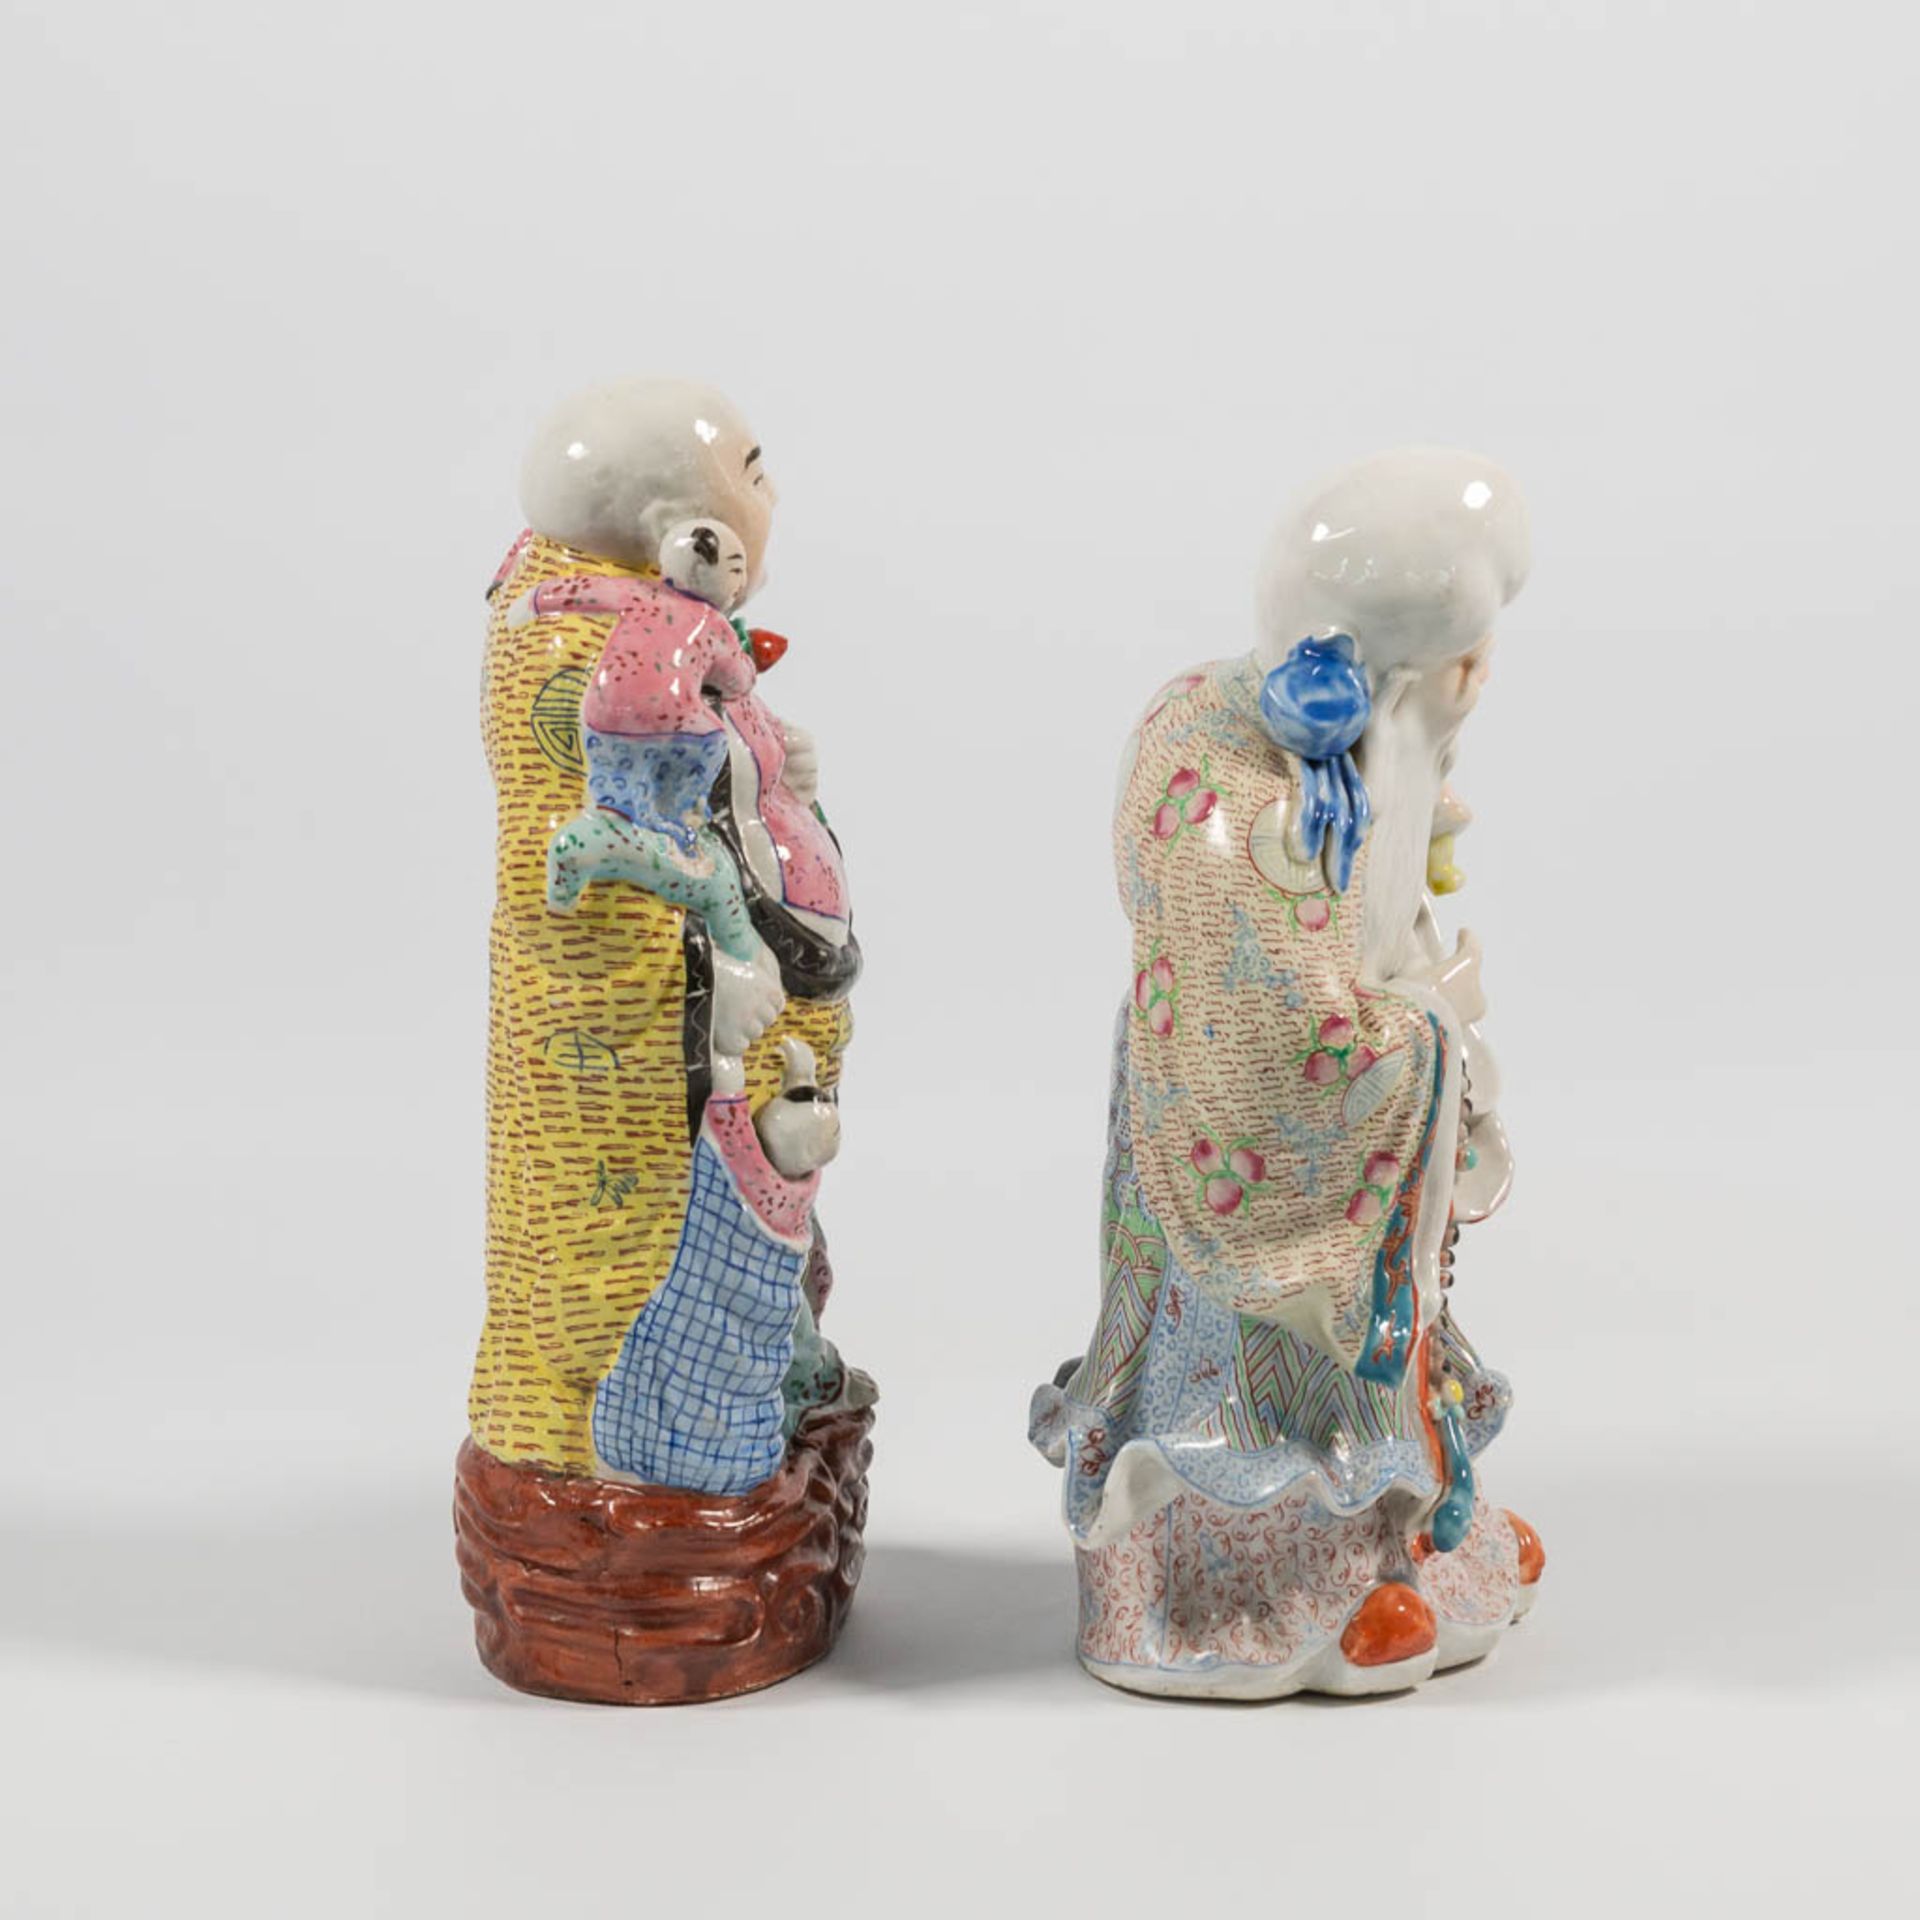 A Collection of 4 Chinese immortal figurines, made of porcelain. - Image 25 of 25